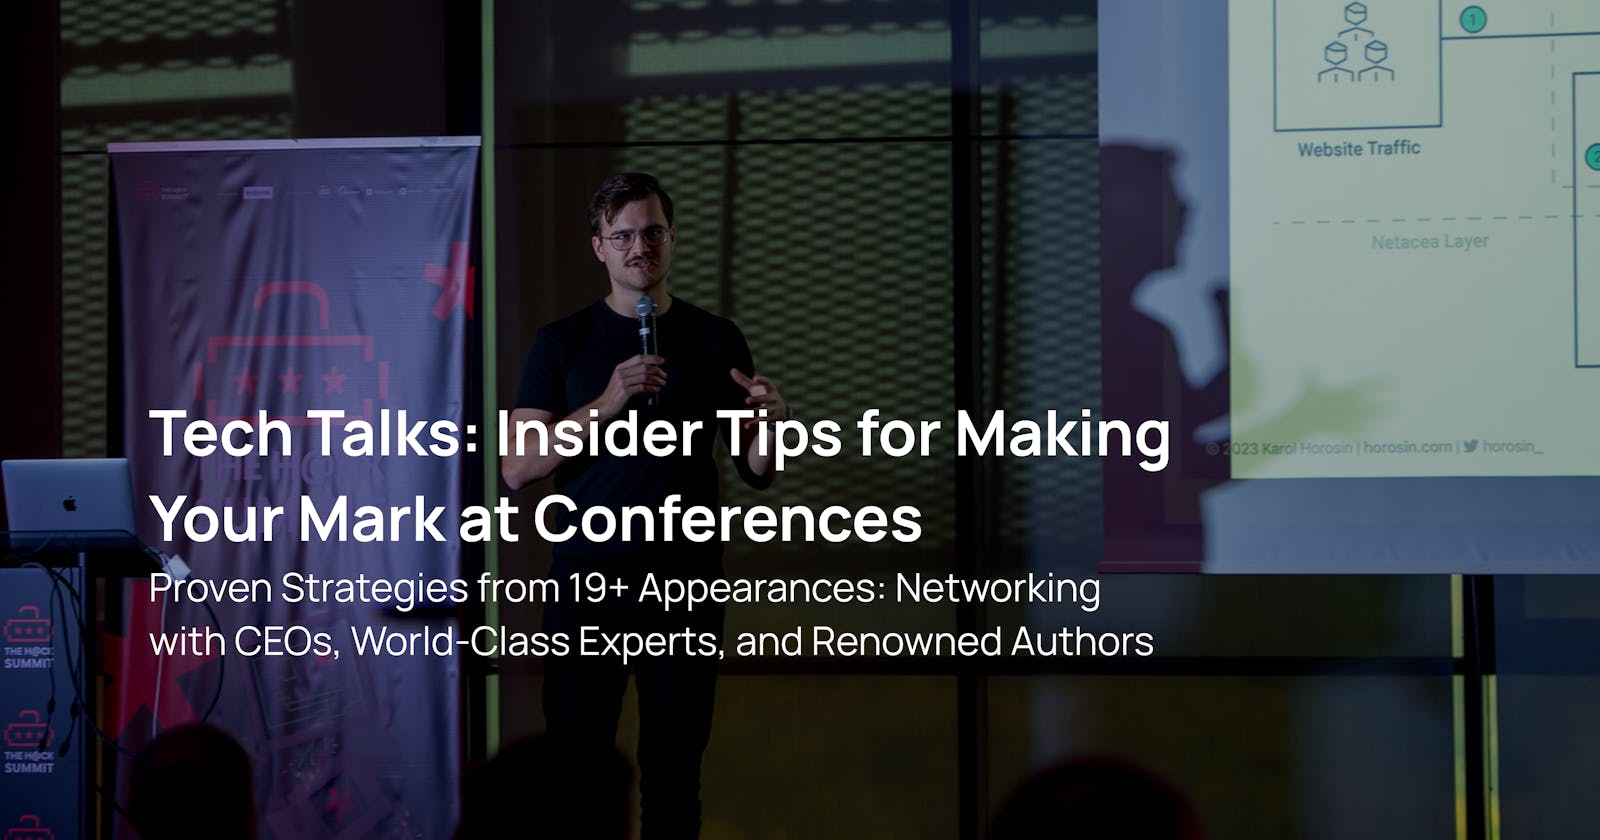 Tech Talks: Insider Tips for Making Your Mark at Conferences